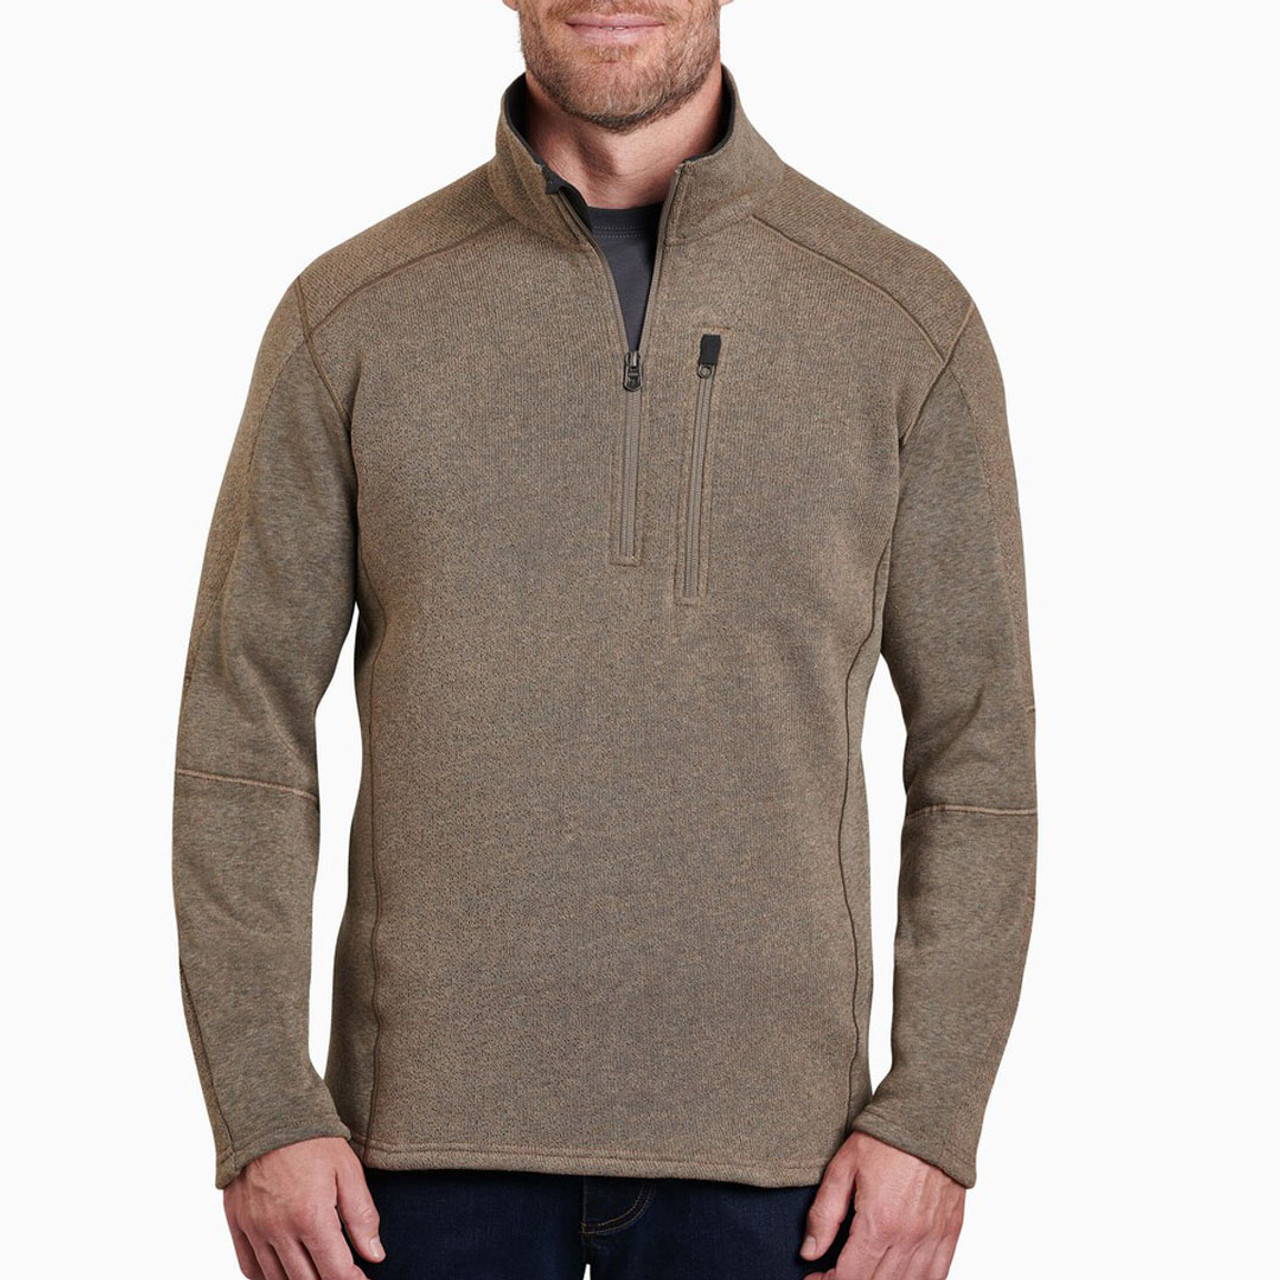 National Athletic Goods - 1/4 Zip Campus Pullover - Oatmeal